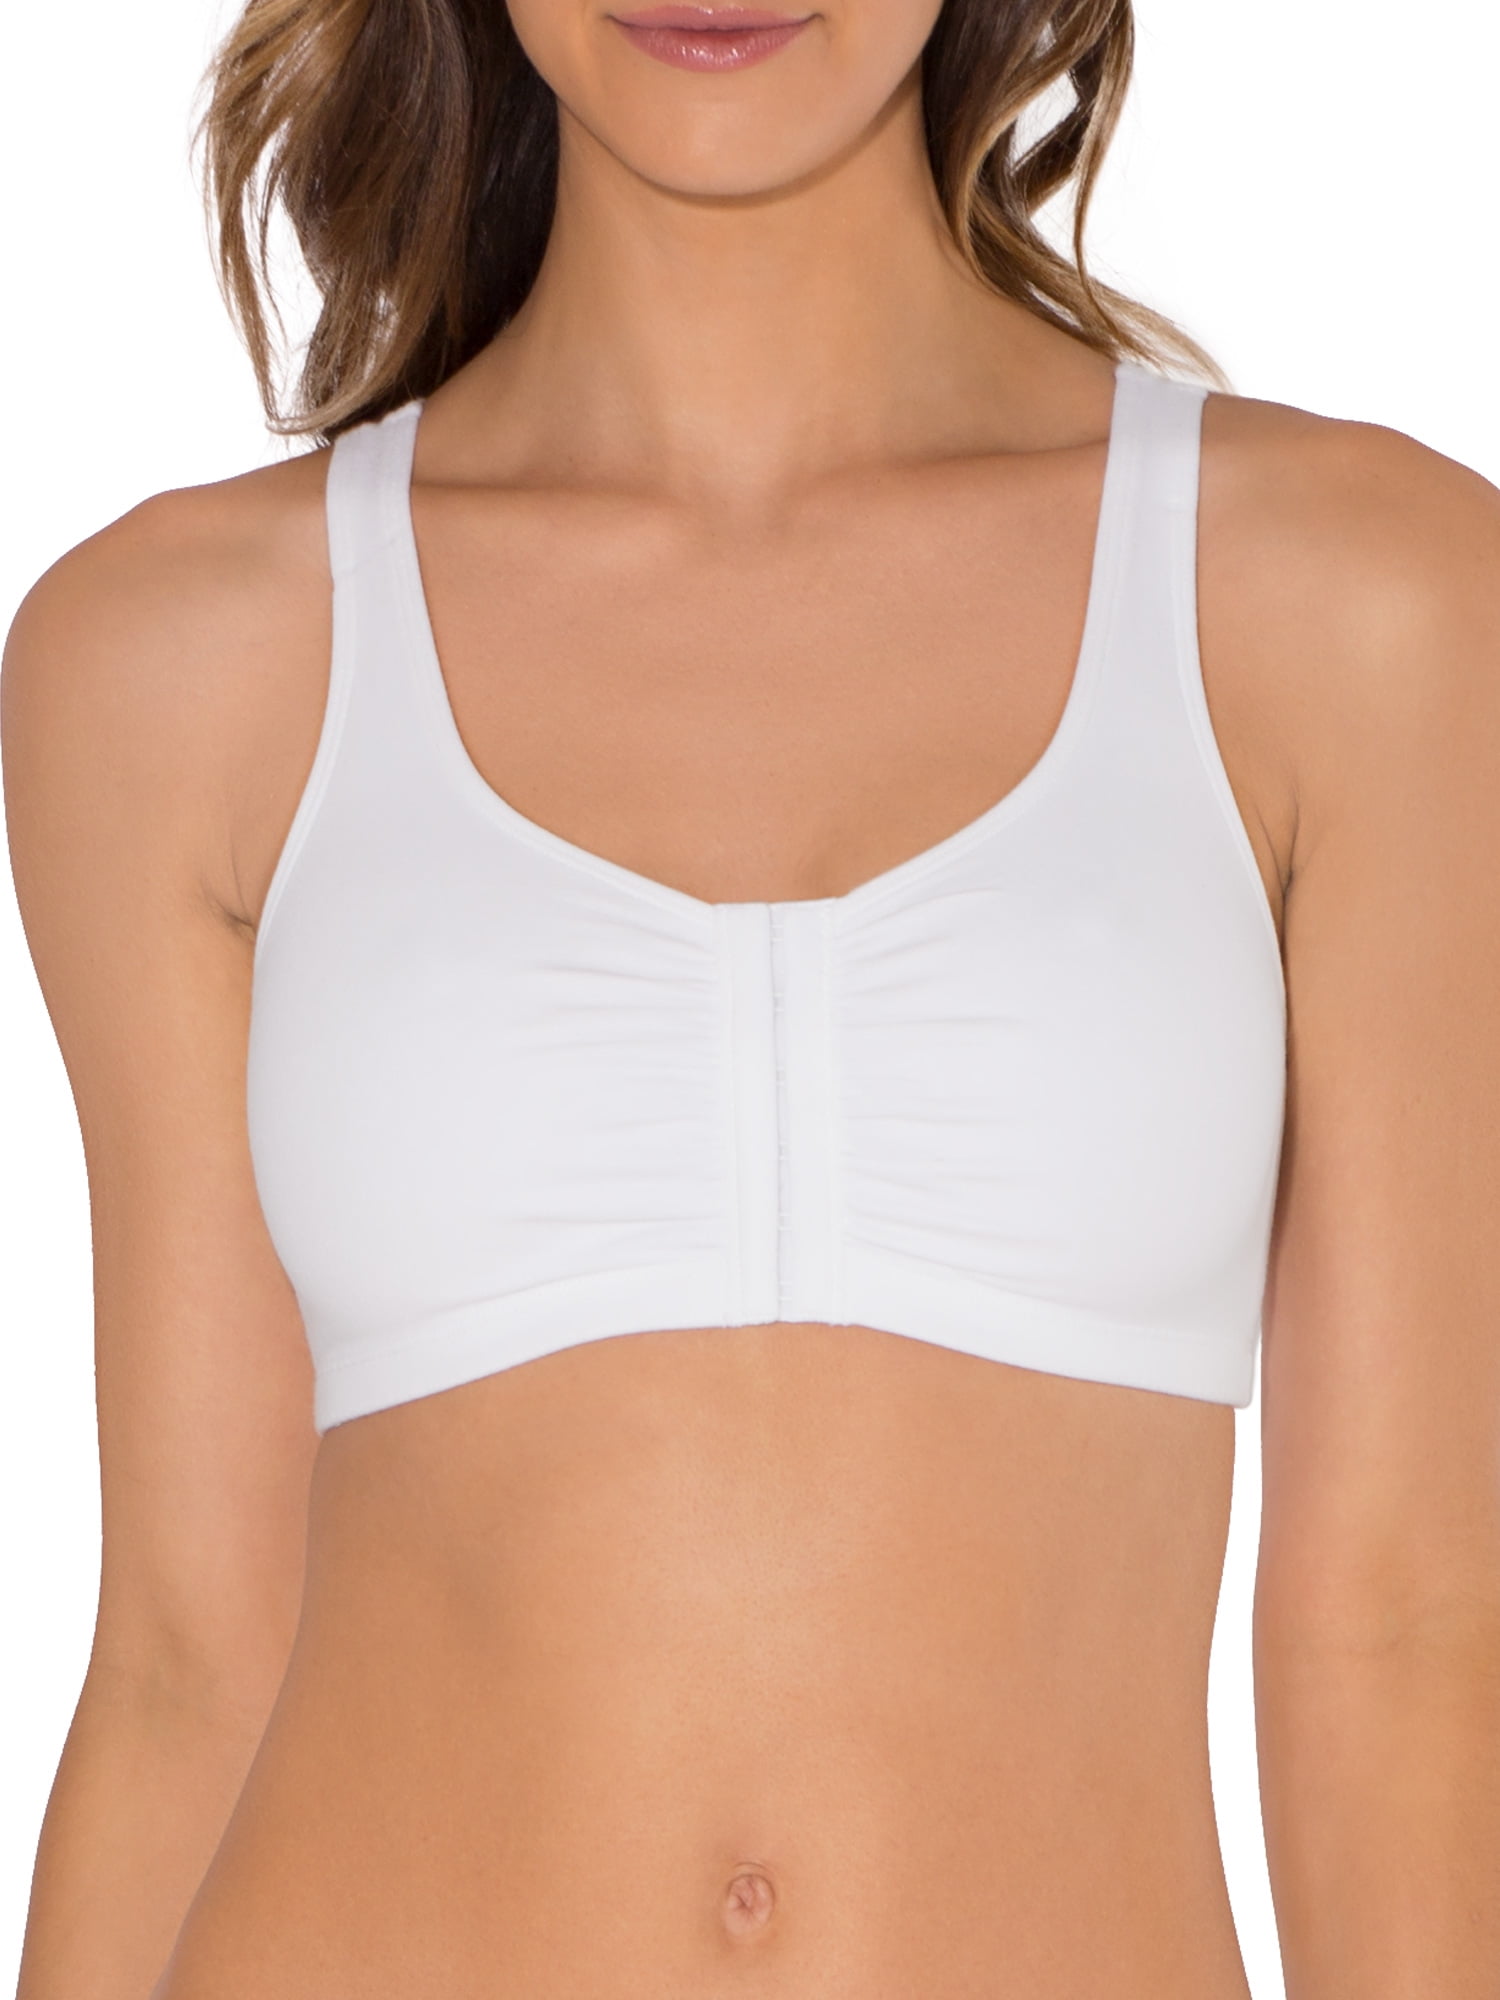 Fruit of the Loom Women's Comfort Front Close Sport Bra With Mesh Straps 